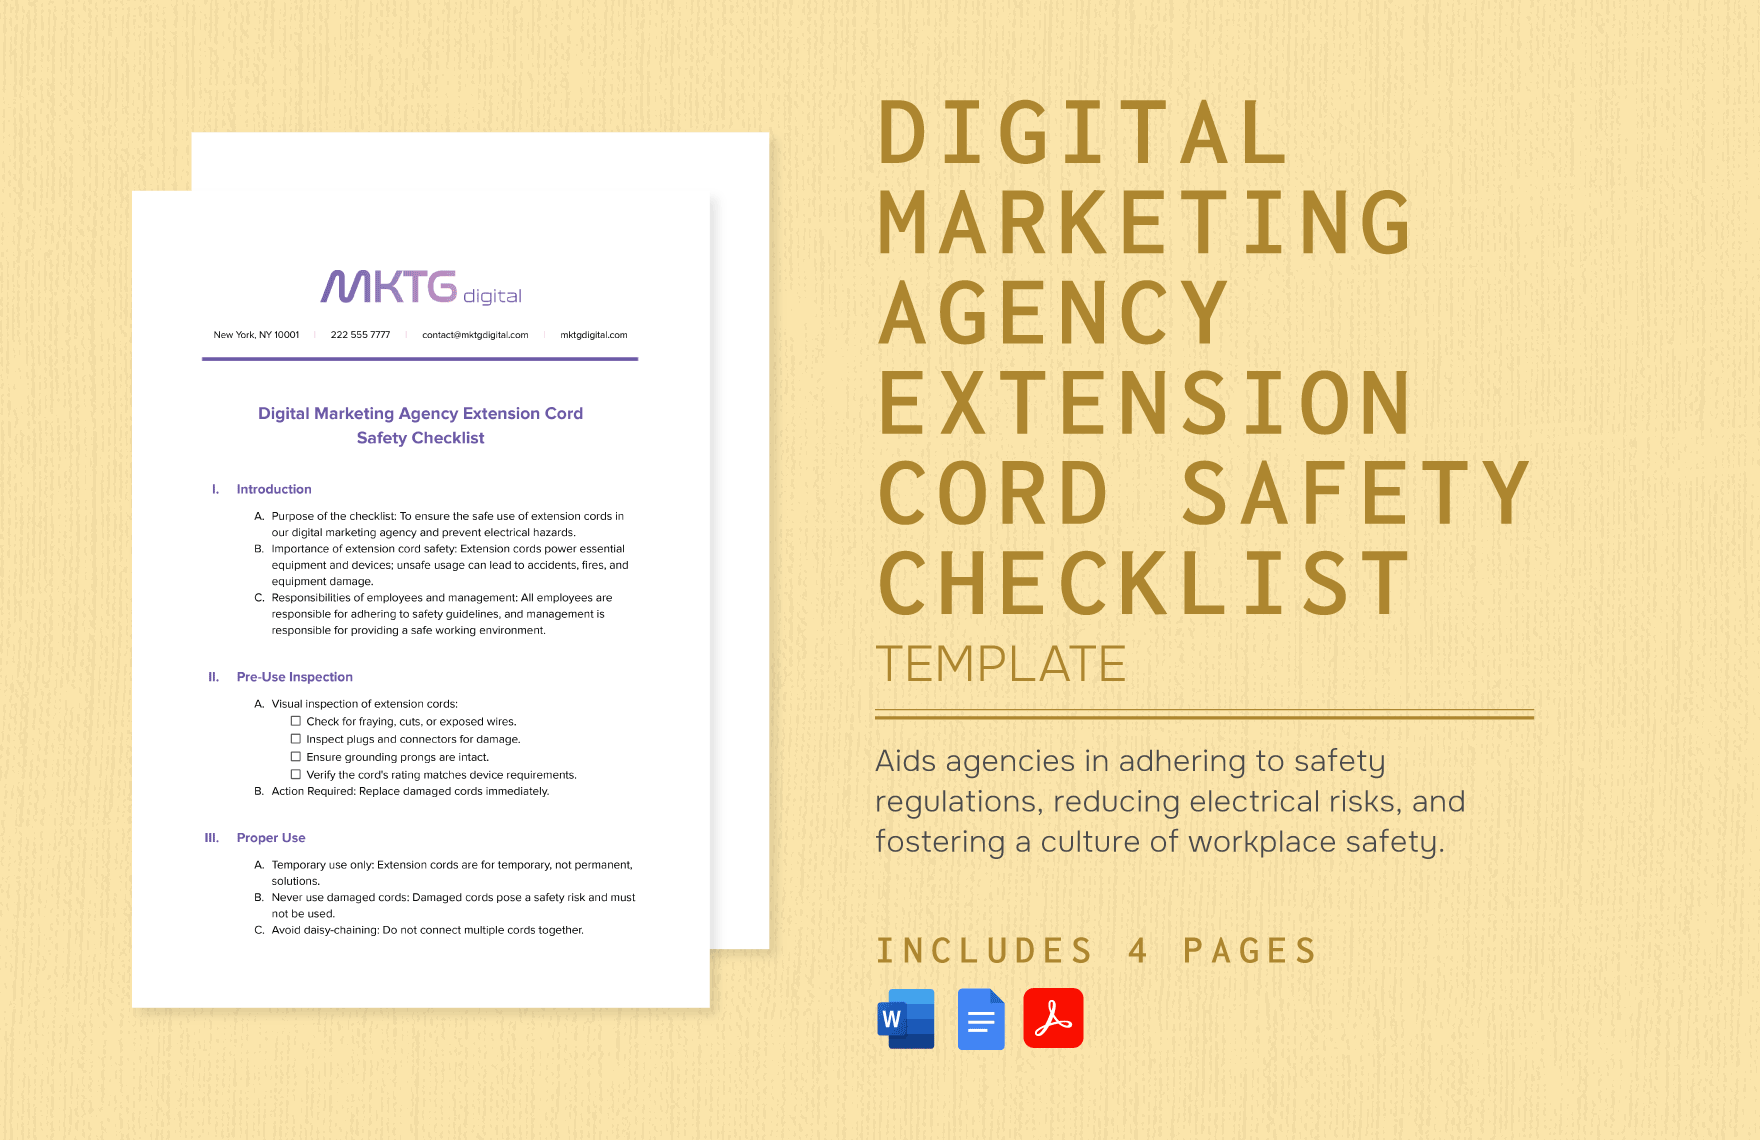 https://images.template.net/161710/digital-marketing-agency-extension-cord-safety-checklist-template-7ywmz.png